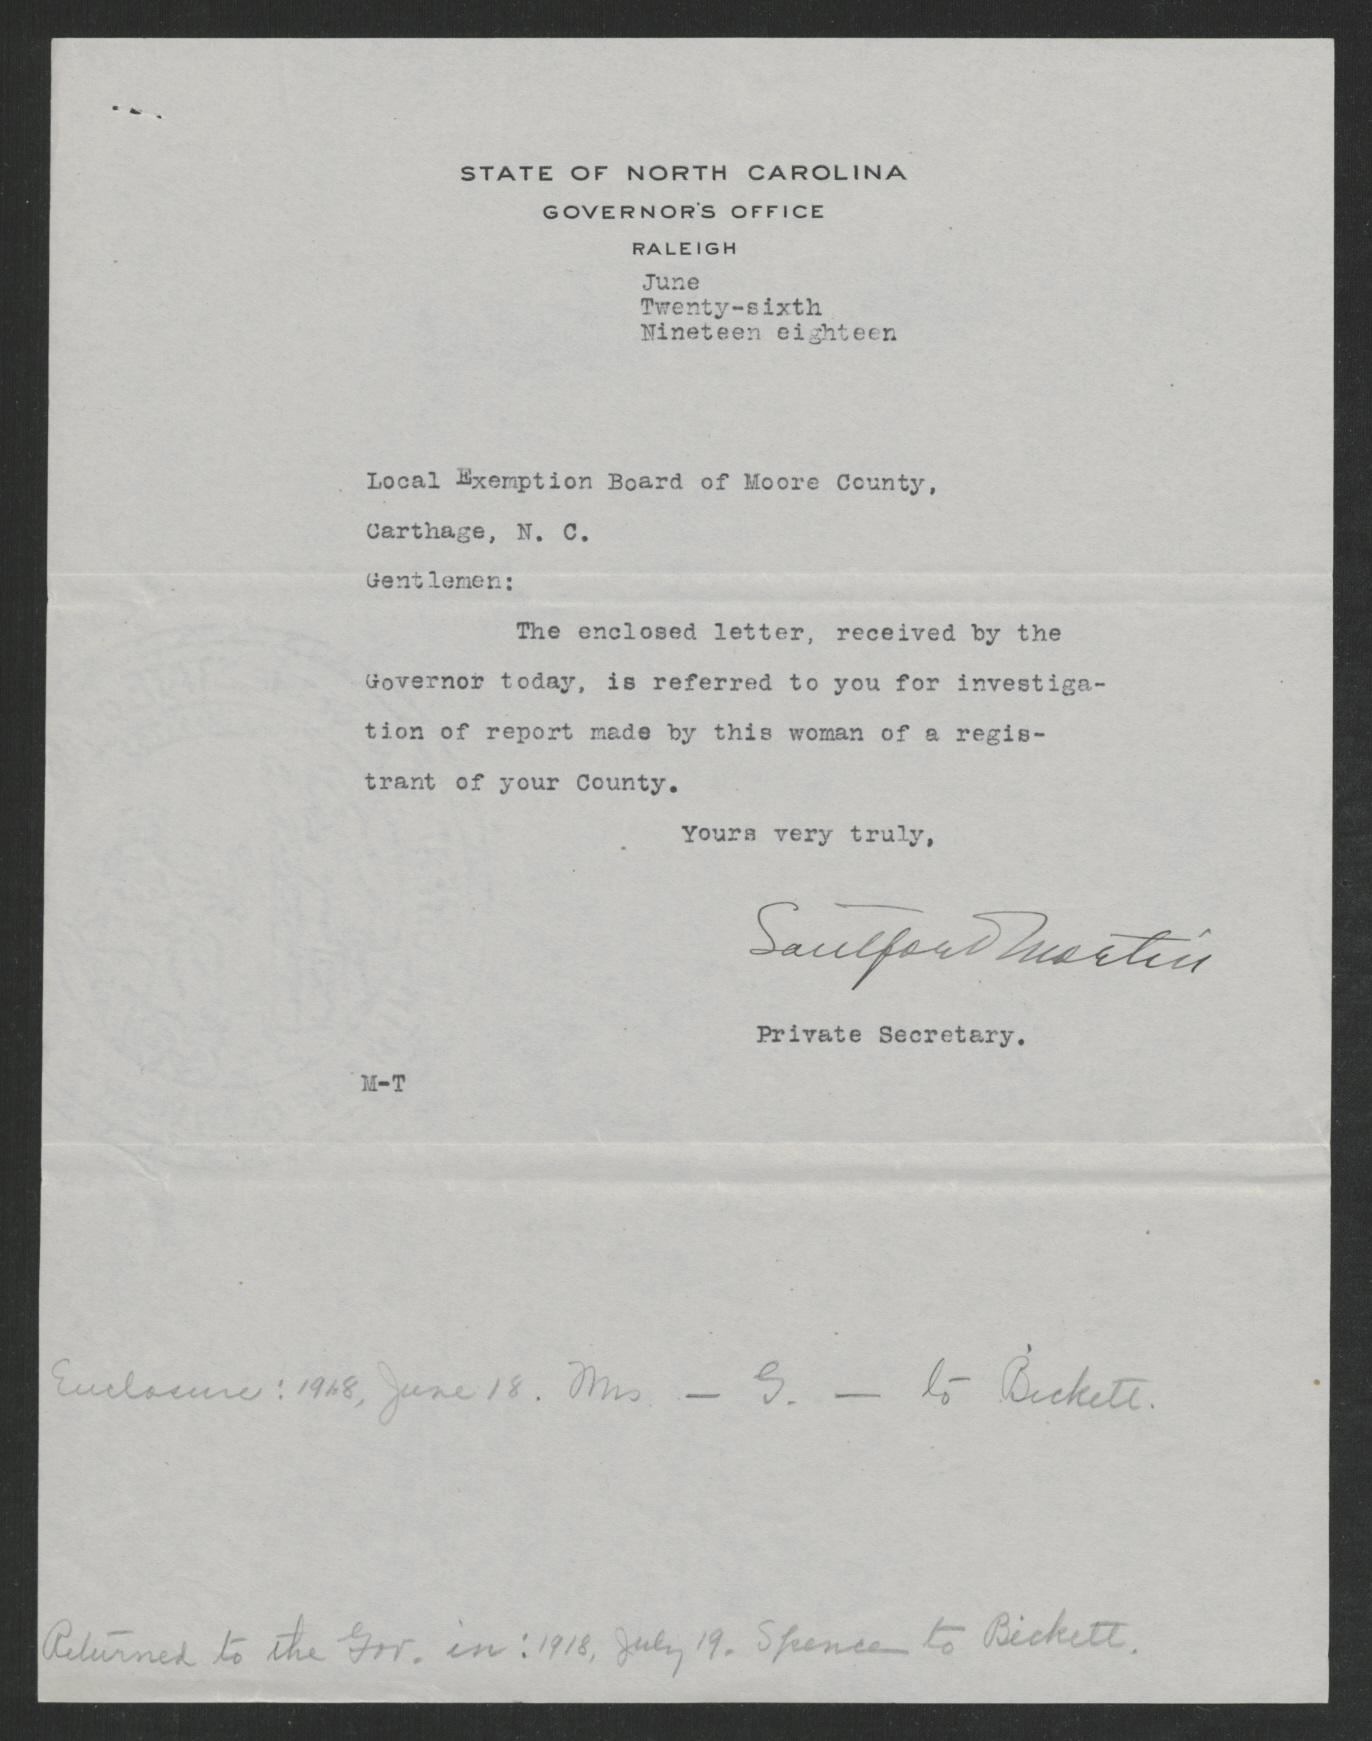 Letter from Santford Martin to the Moore County Exemption Board, June 26, 1918